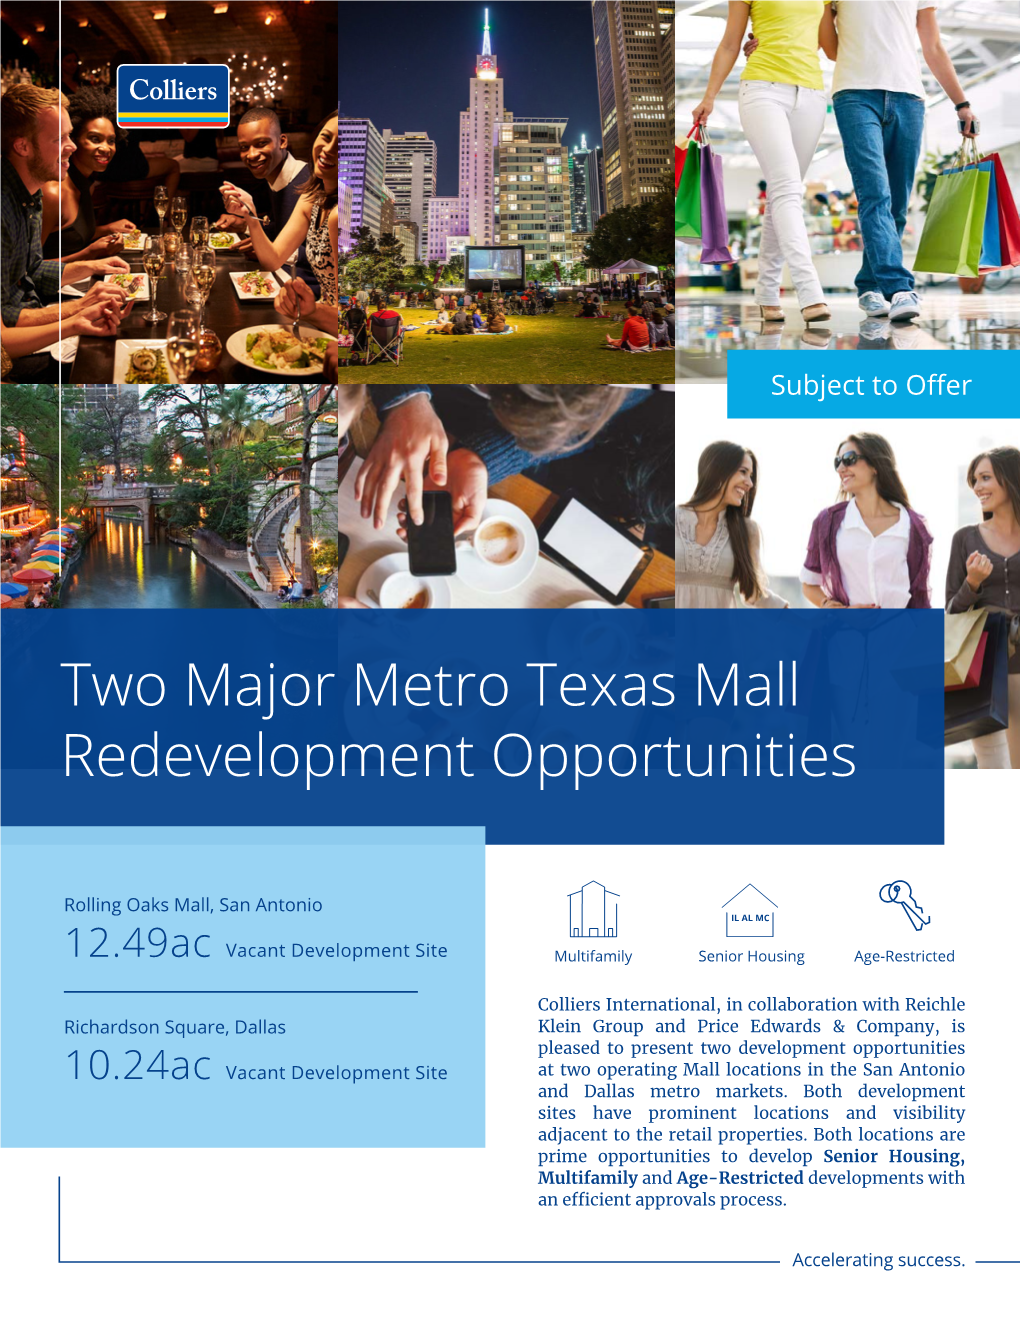 Two Major Metro Texas Mall Redevelopment Opportunities